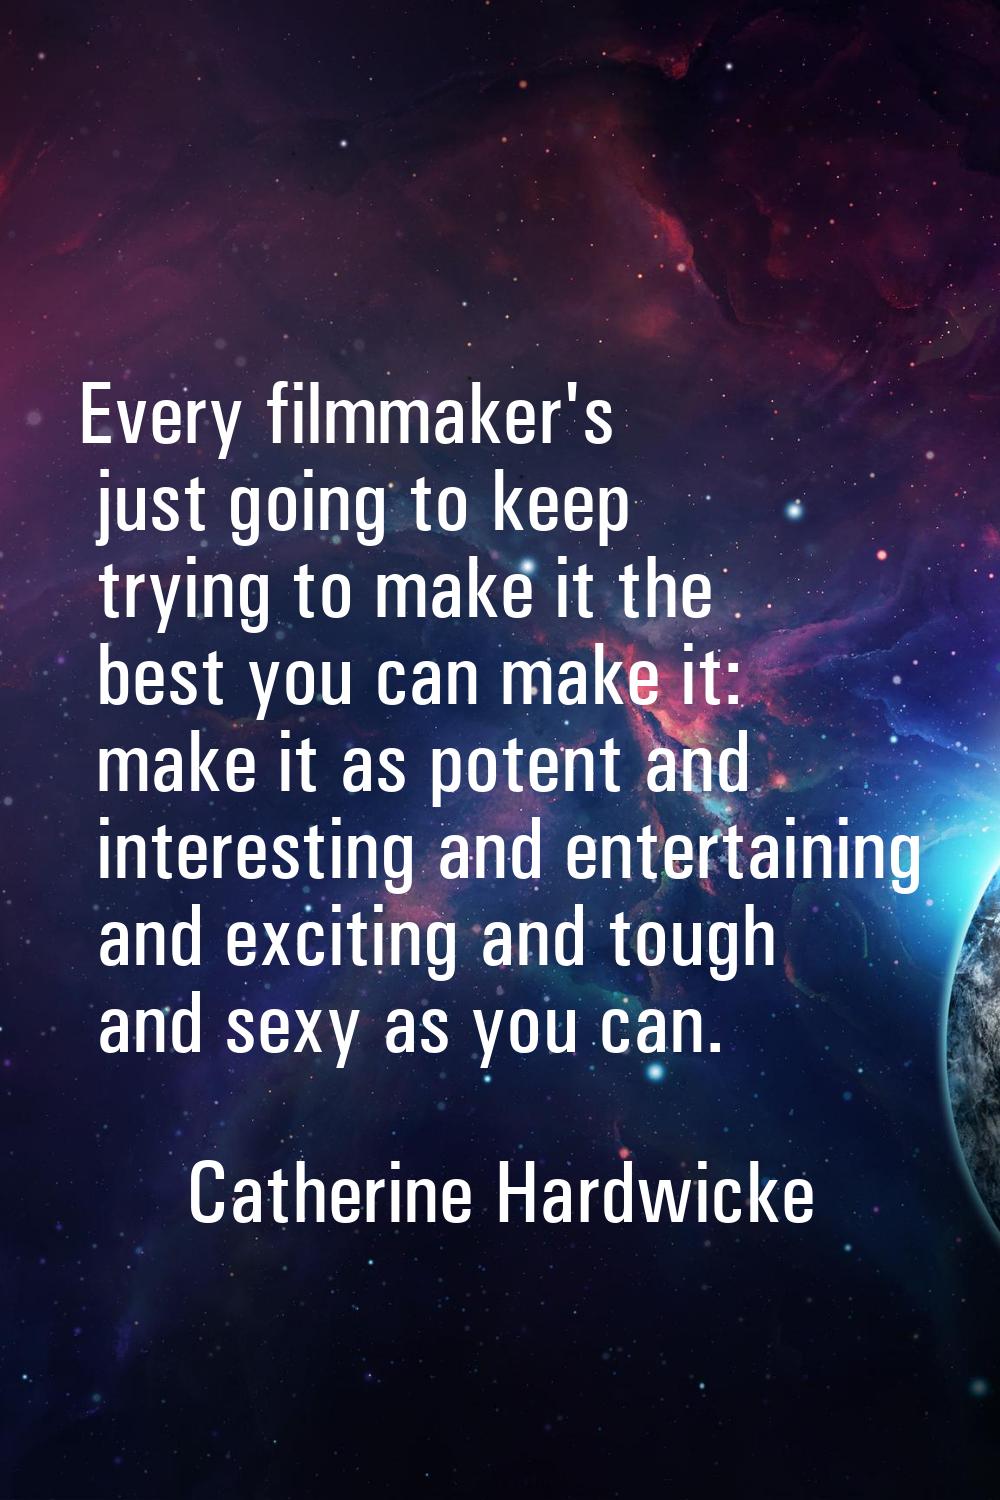 Every filmmaker's just going to keep trying to make it the best you can make it: make it as potent 